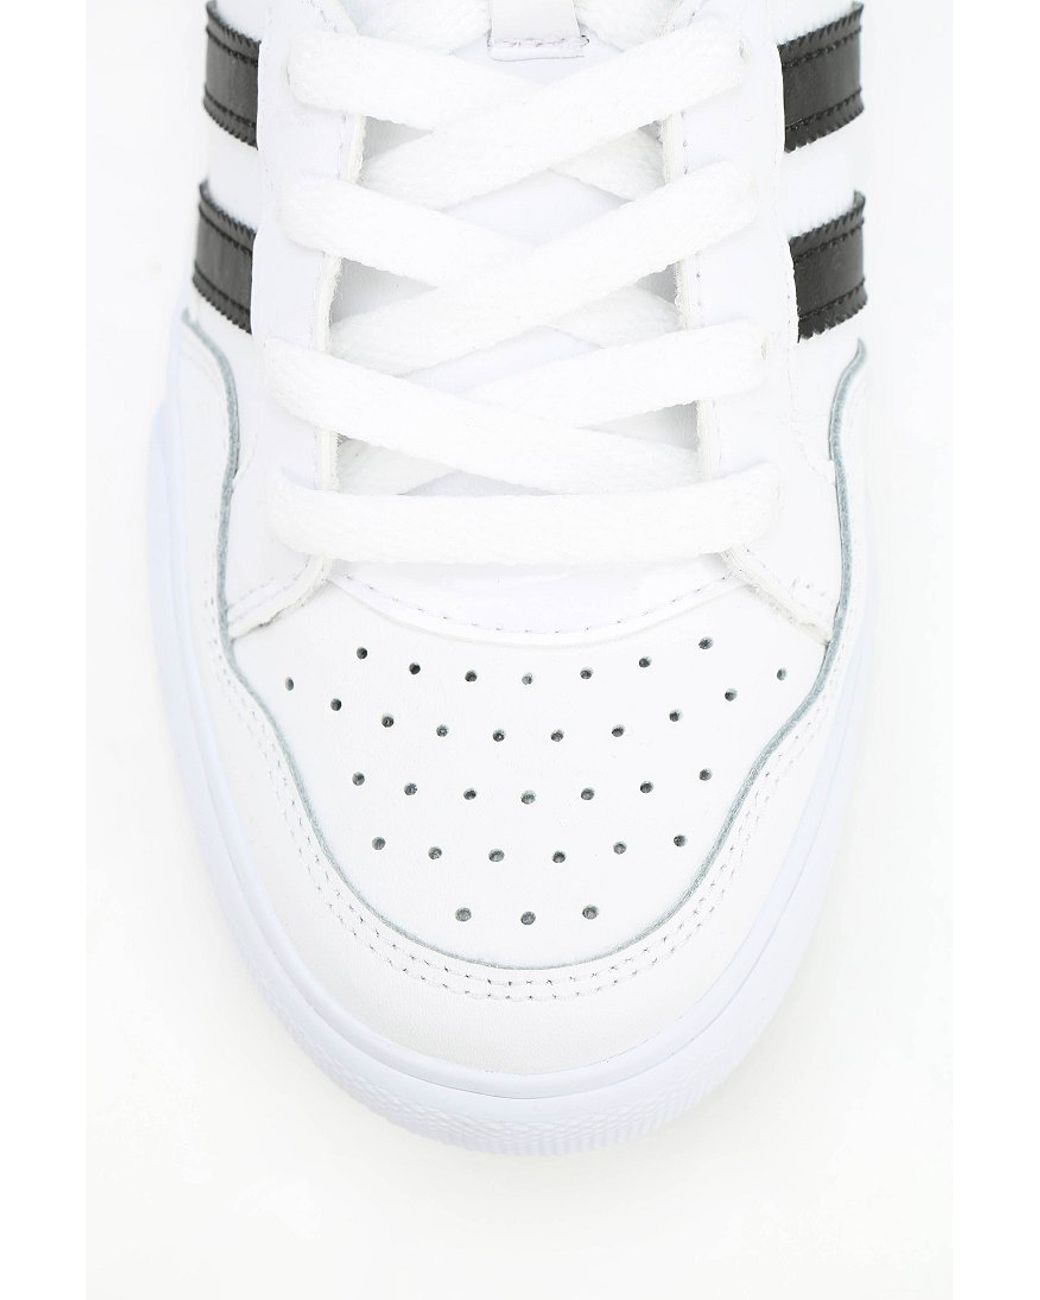 adidas Originals Extaball Leather Hightop Sneaker in White | Lyst